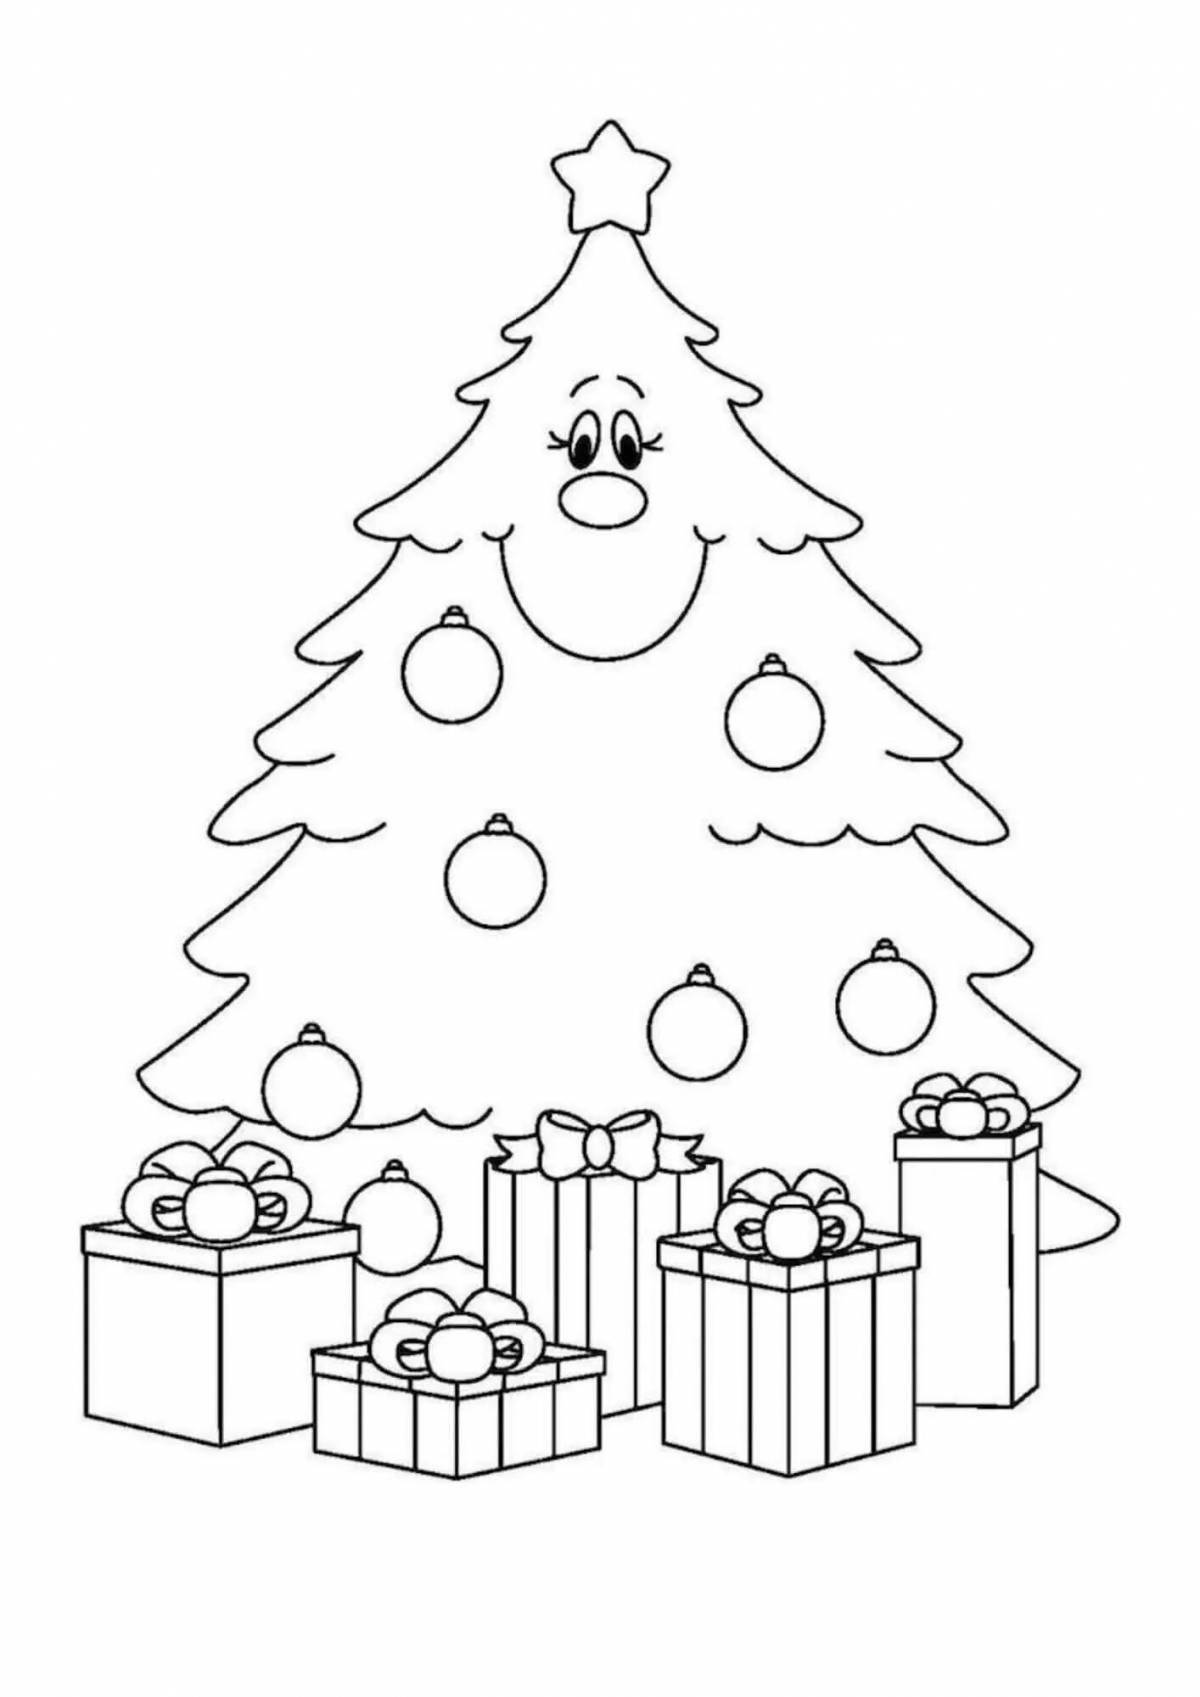 Colorful Christmas tree coloring card